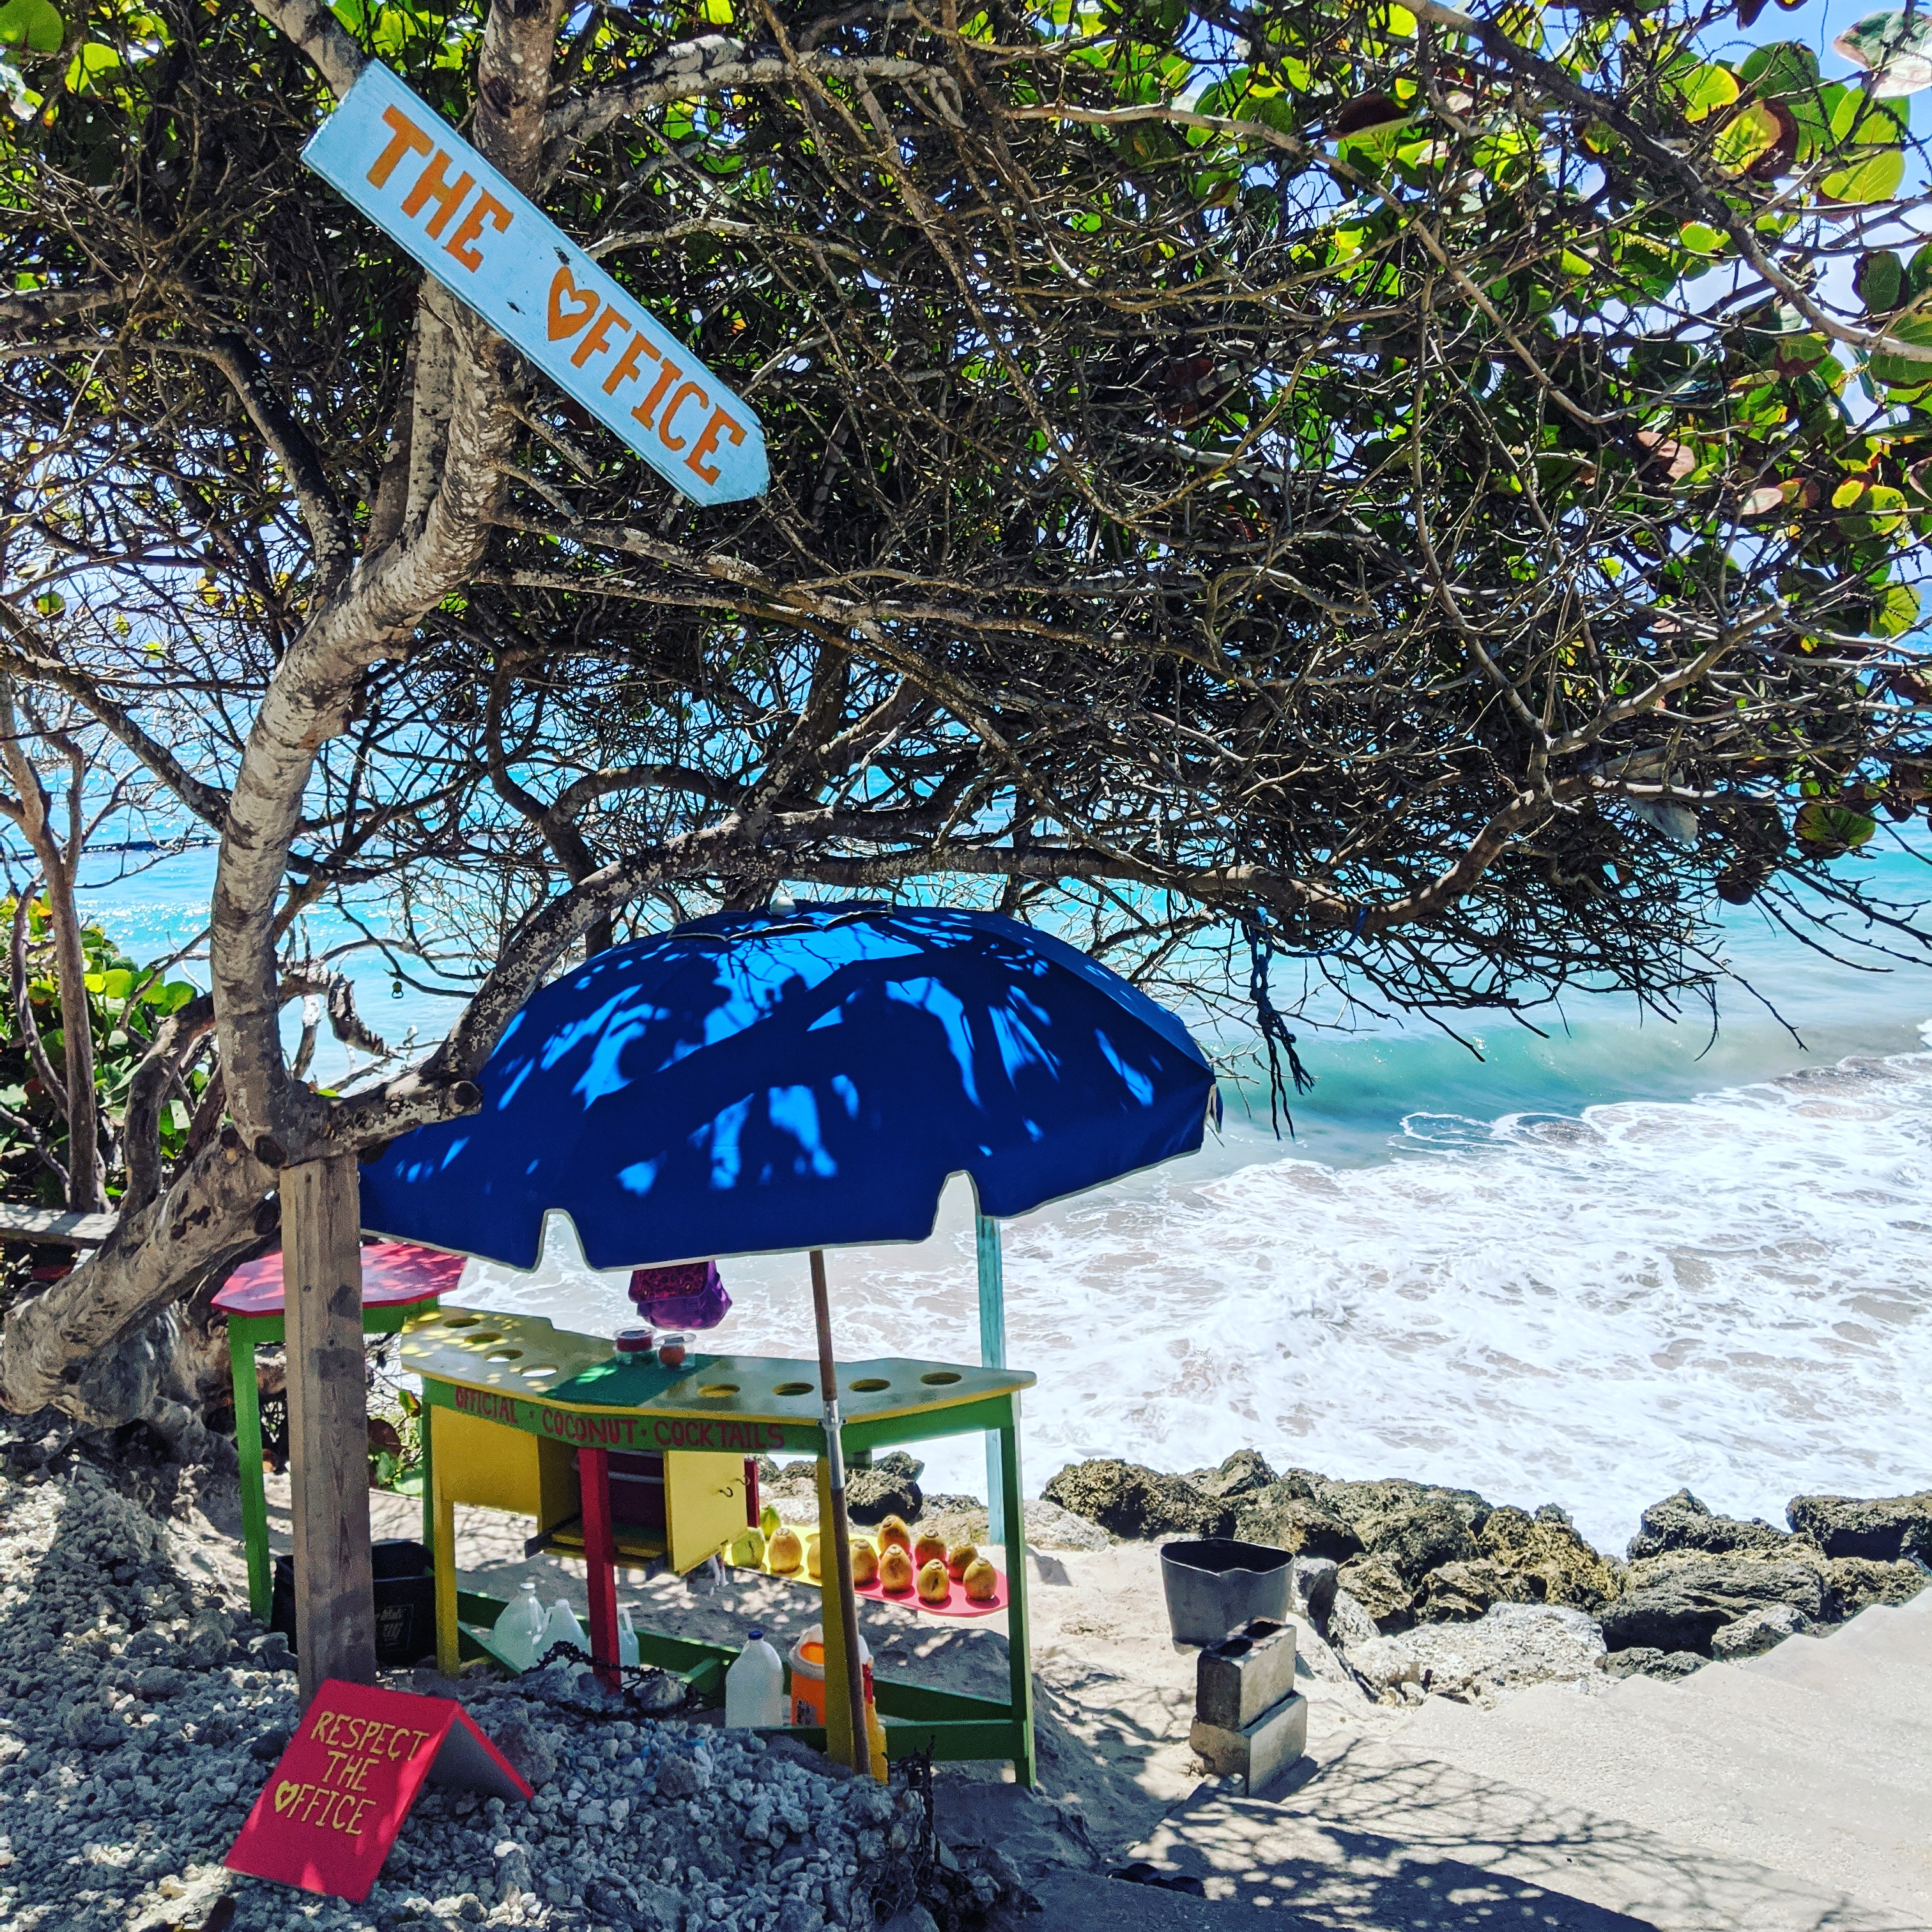 A blue beach umbrella on the edge of Crane Beach with a coconut stall beneath it. Crane beach is one of the most beautiful beaches in barbados